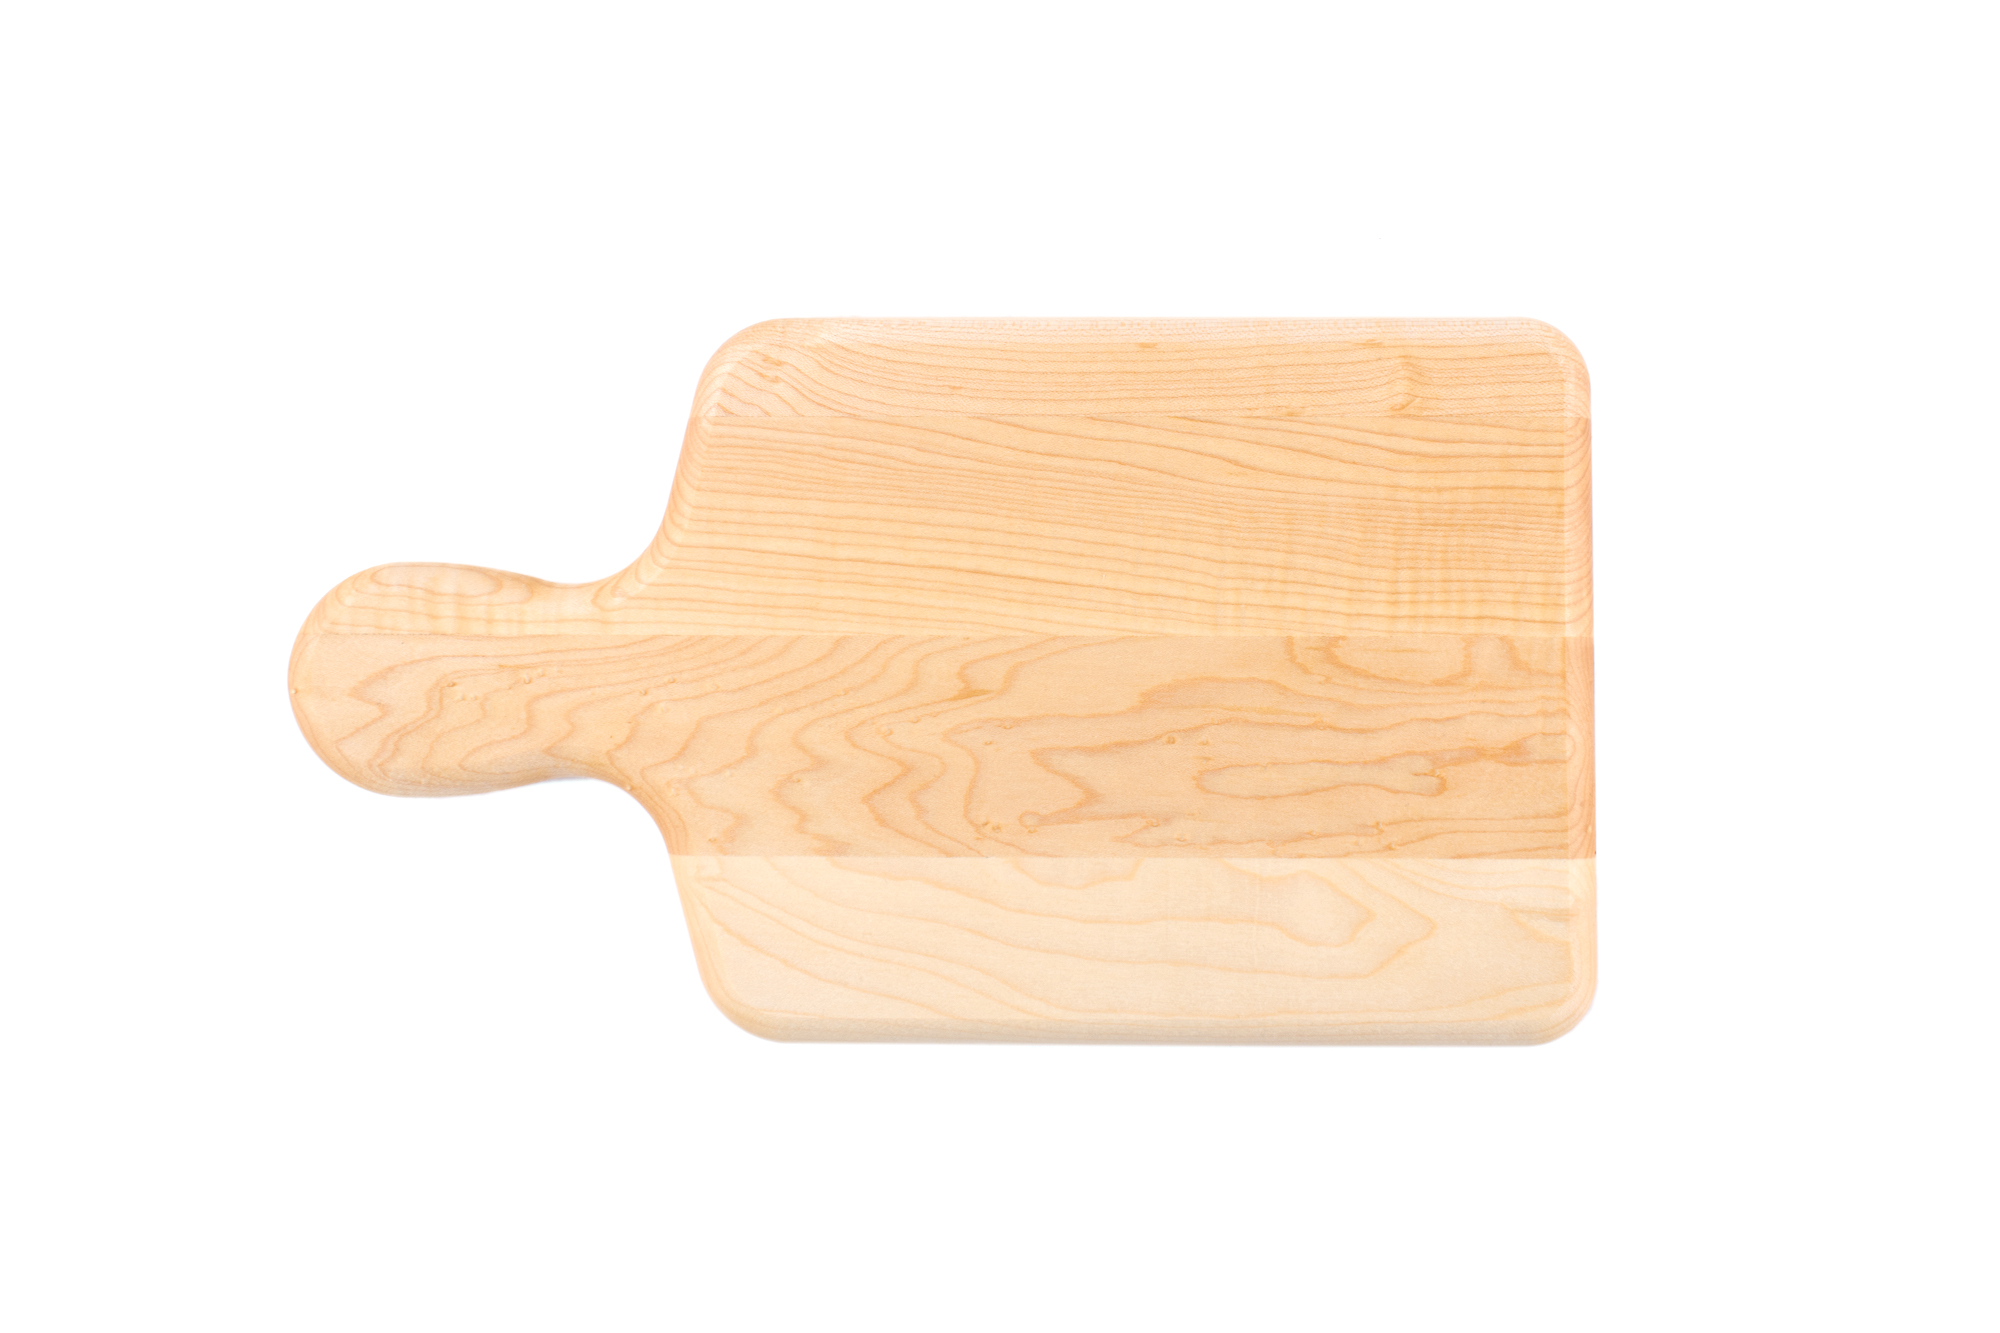 Maple wood cutting/serving board with handle and bullnose edges